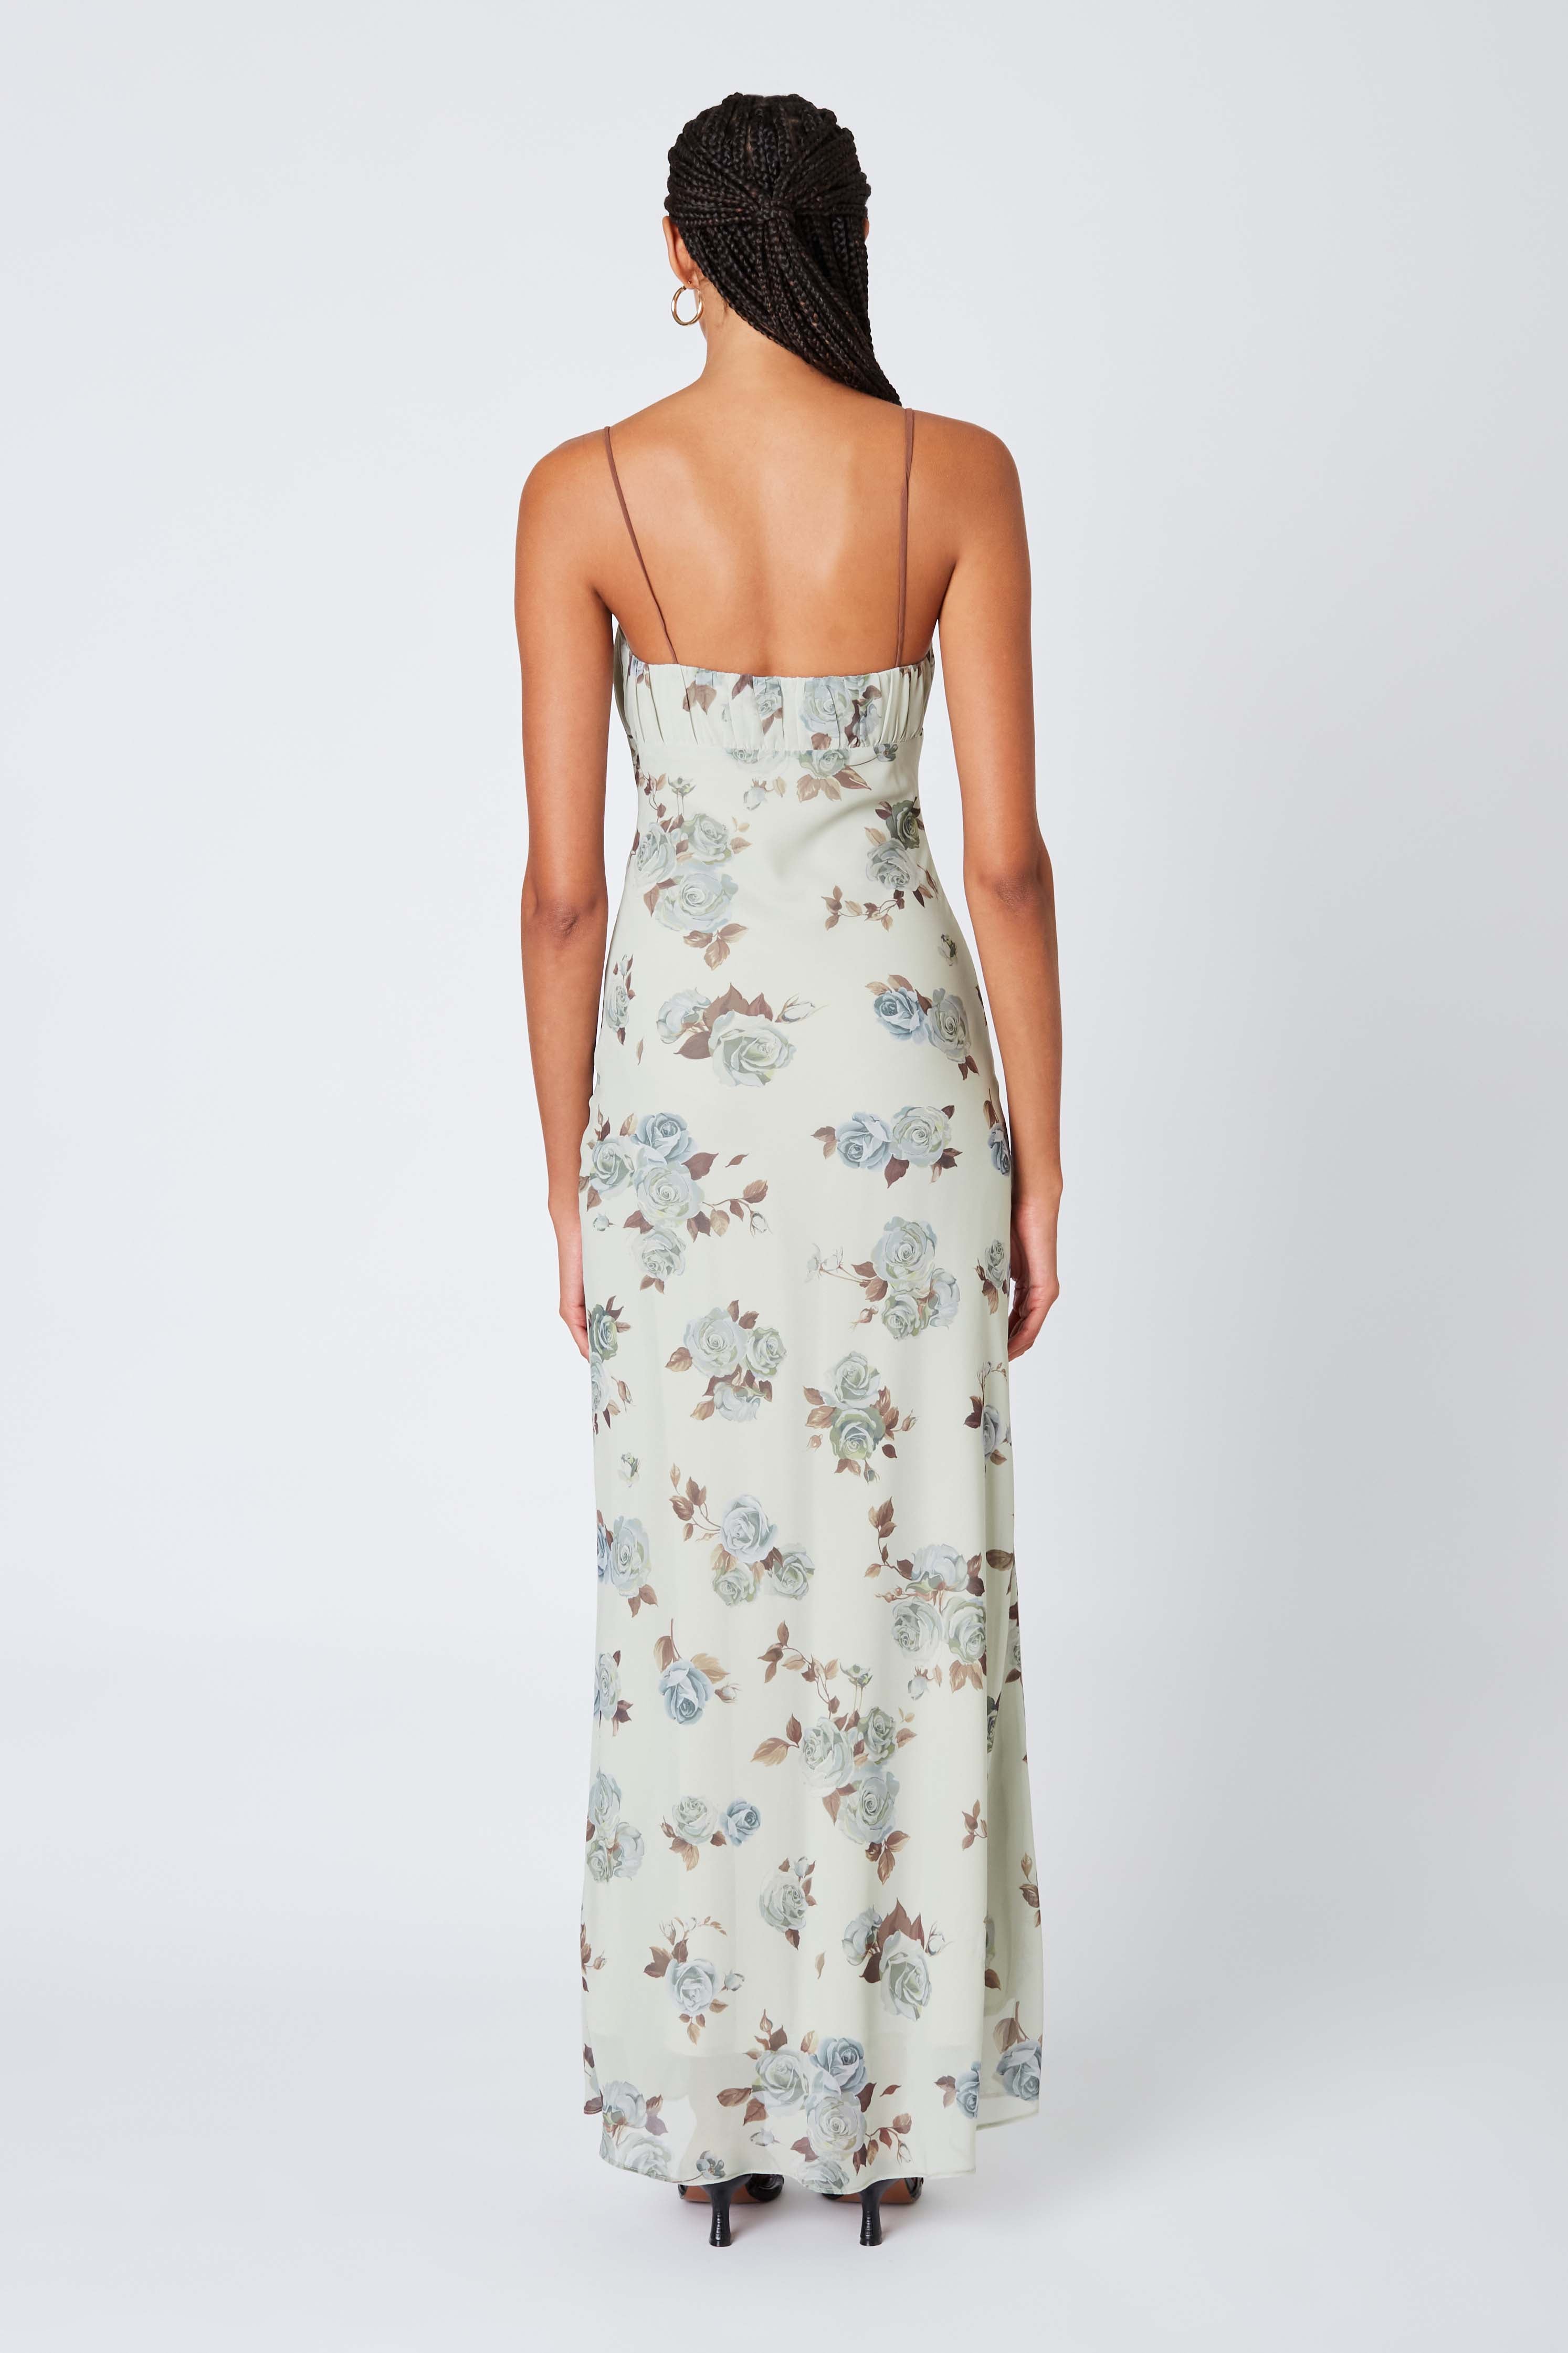 Floral Maxi Dress in Fern Back View